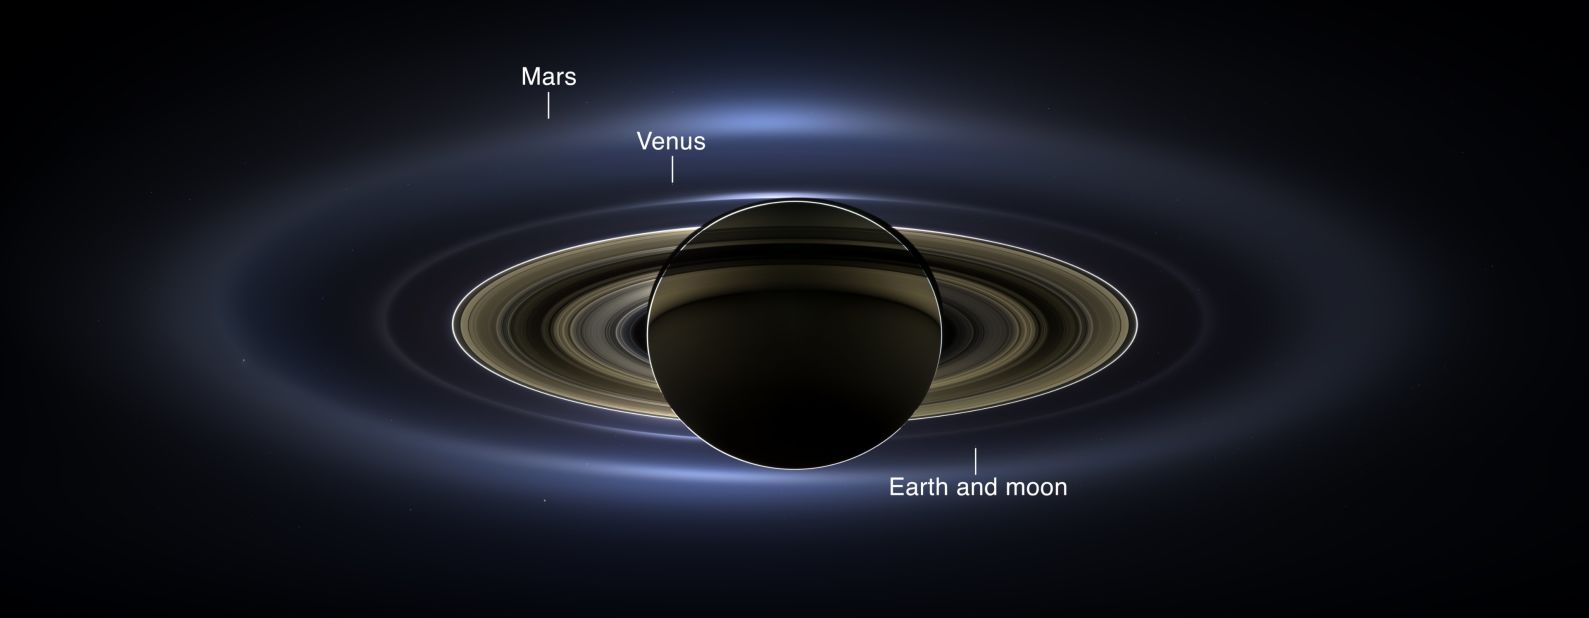 NASA's Cassini-Huygens spacecraft -- in service since 1997 and in orbit around the ringed giant since 2004 -- took pictures of Saturn and its rings during a solar eclipse on July 19. It acquired a panoramic mosaic of the Saturn system that allows scientists to see details in the rings and throughout the system as they are backlit by the sun. This mosaic marks the third time Earth has been imaged from the outer solar system. It is the second time it has been imaged by Cassini from Saturn's orbit. This annotated image shows Earth as a tiny dot. 